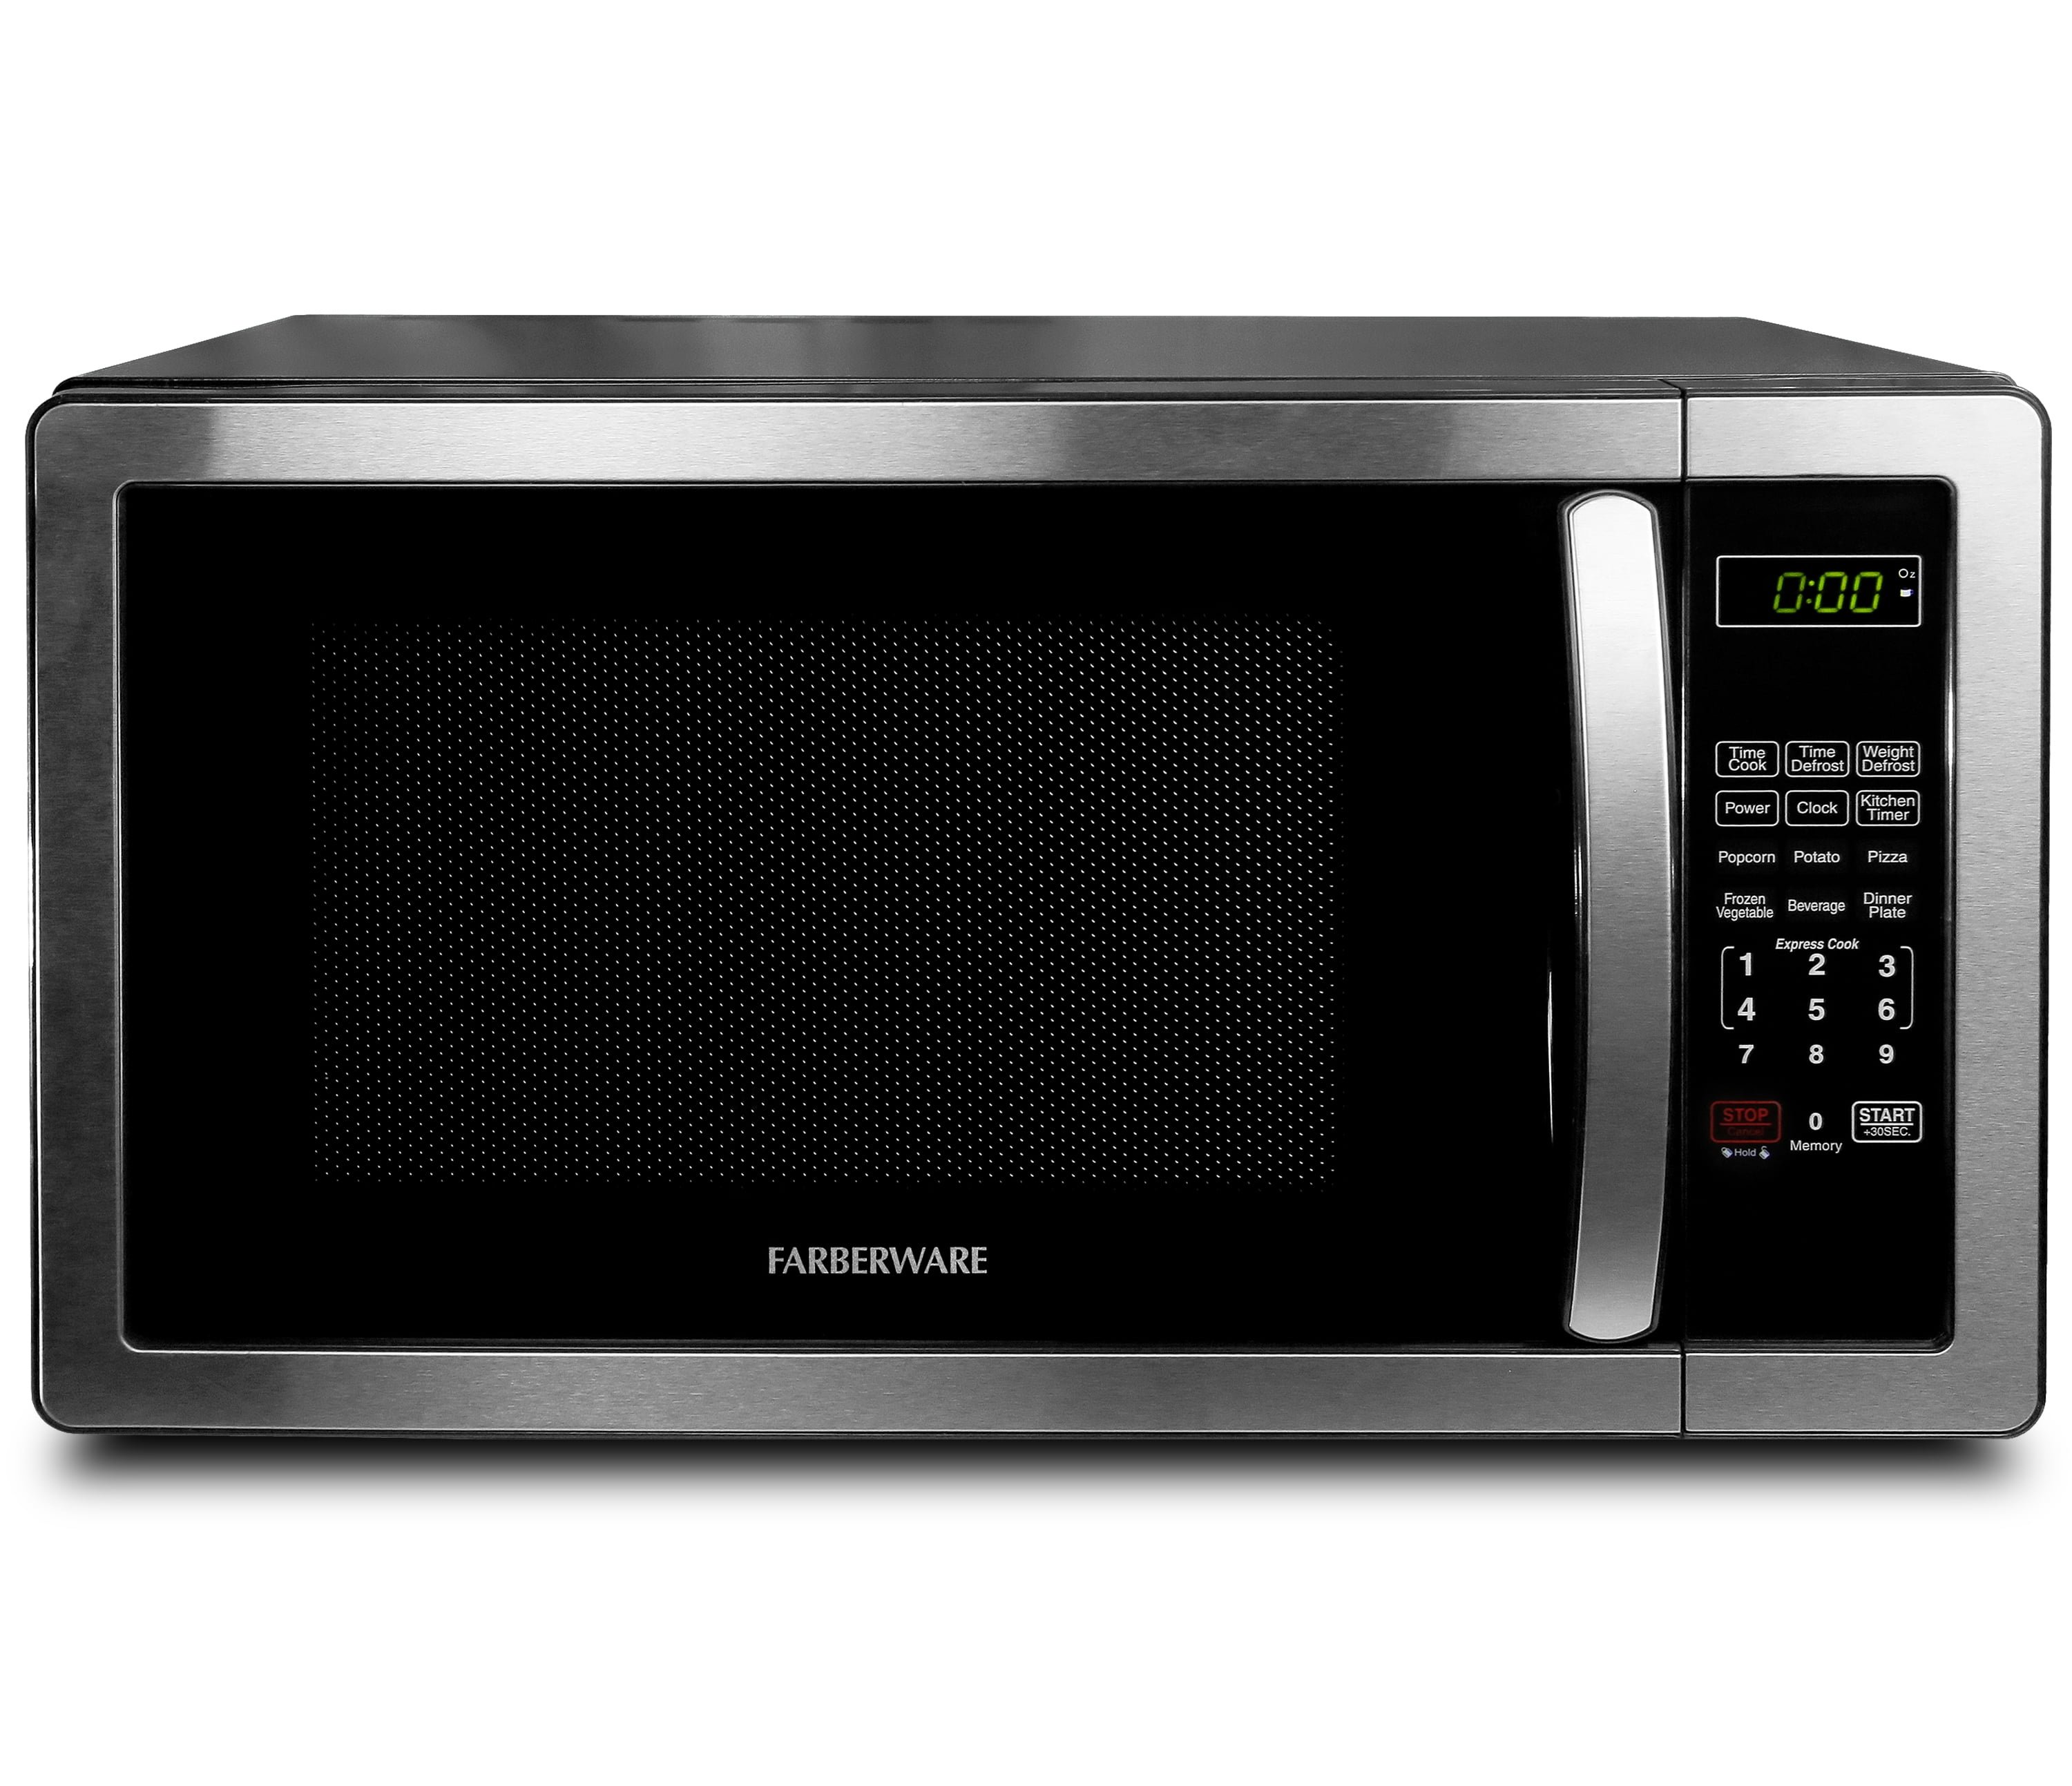 Magic Chef MCD1310ST 1000W 1.3 cu.ft Countertop Microwave Oven Stainless Steel